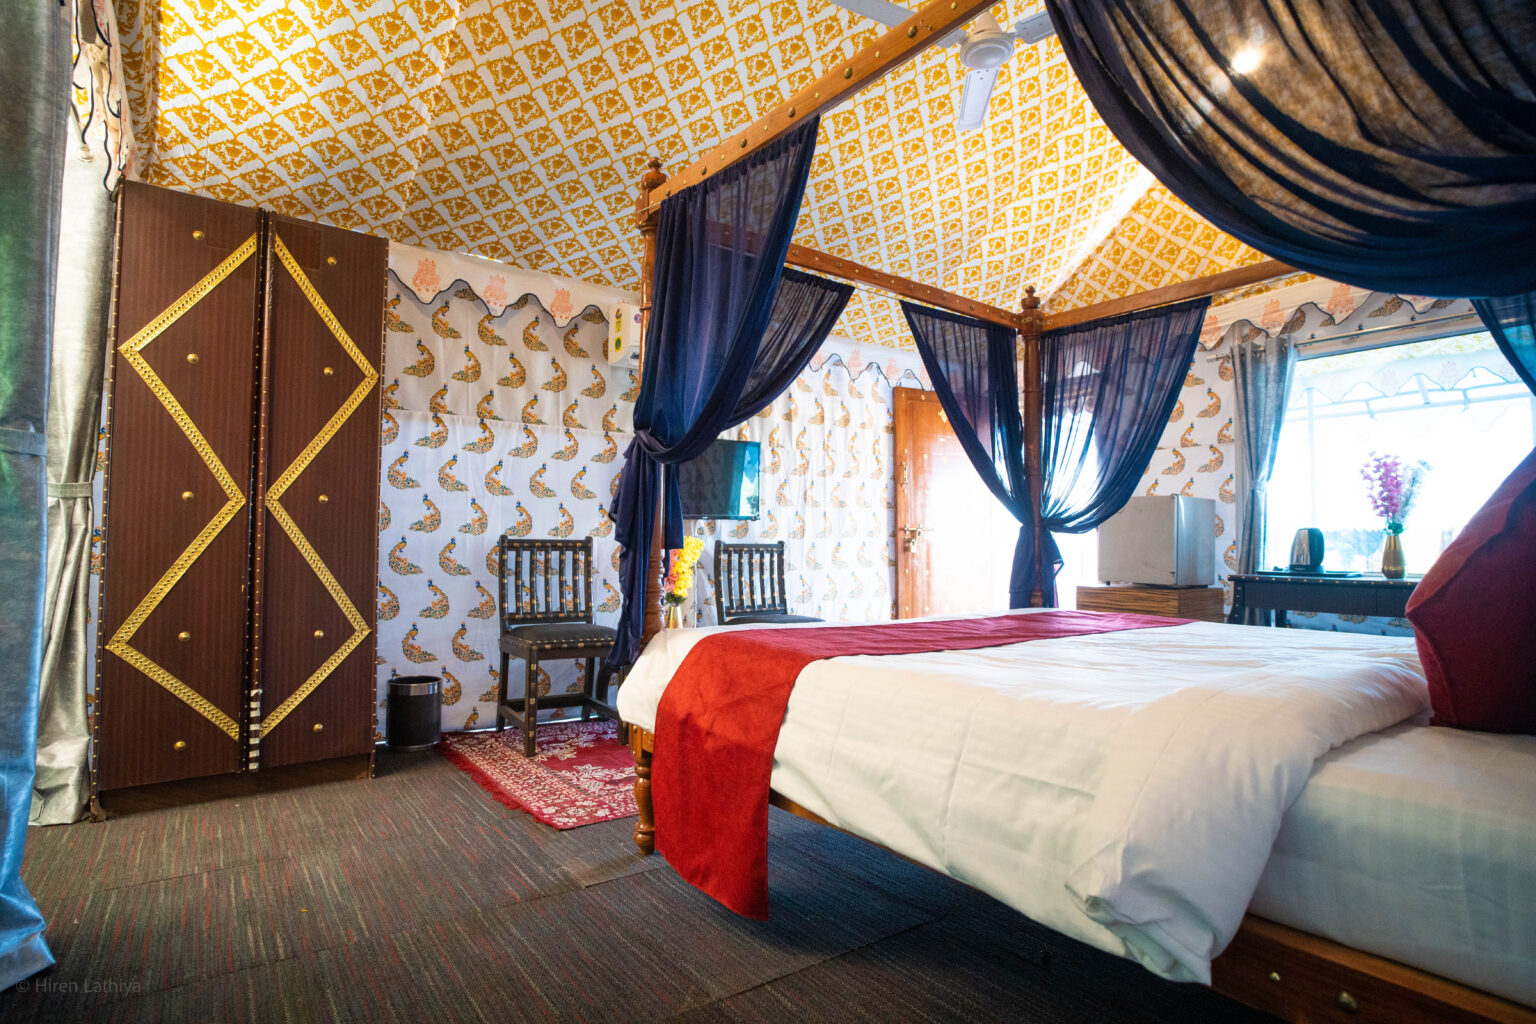 <span  class="uc_style_uc_tiles_grid_image_elementor_uc_items_attribute_title" style="color:#ffffff;">The Royal Heritage Tent Resort Online Booking</span>